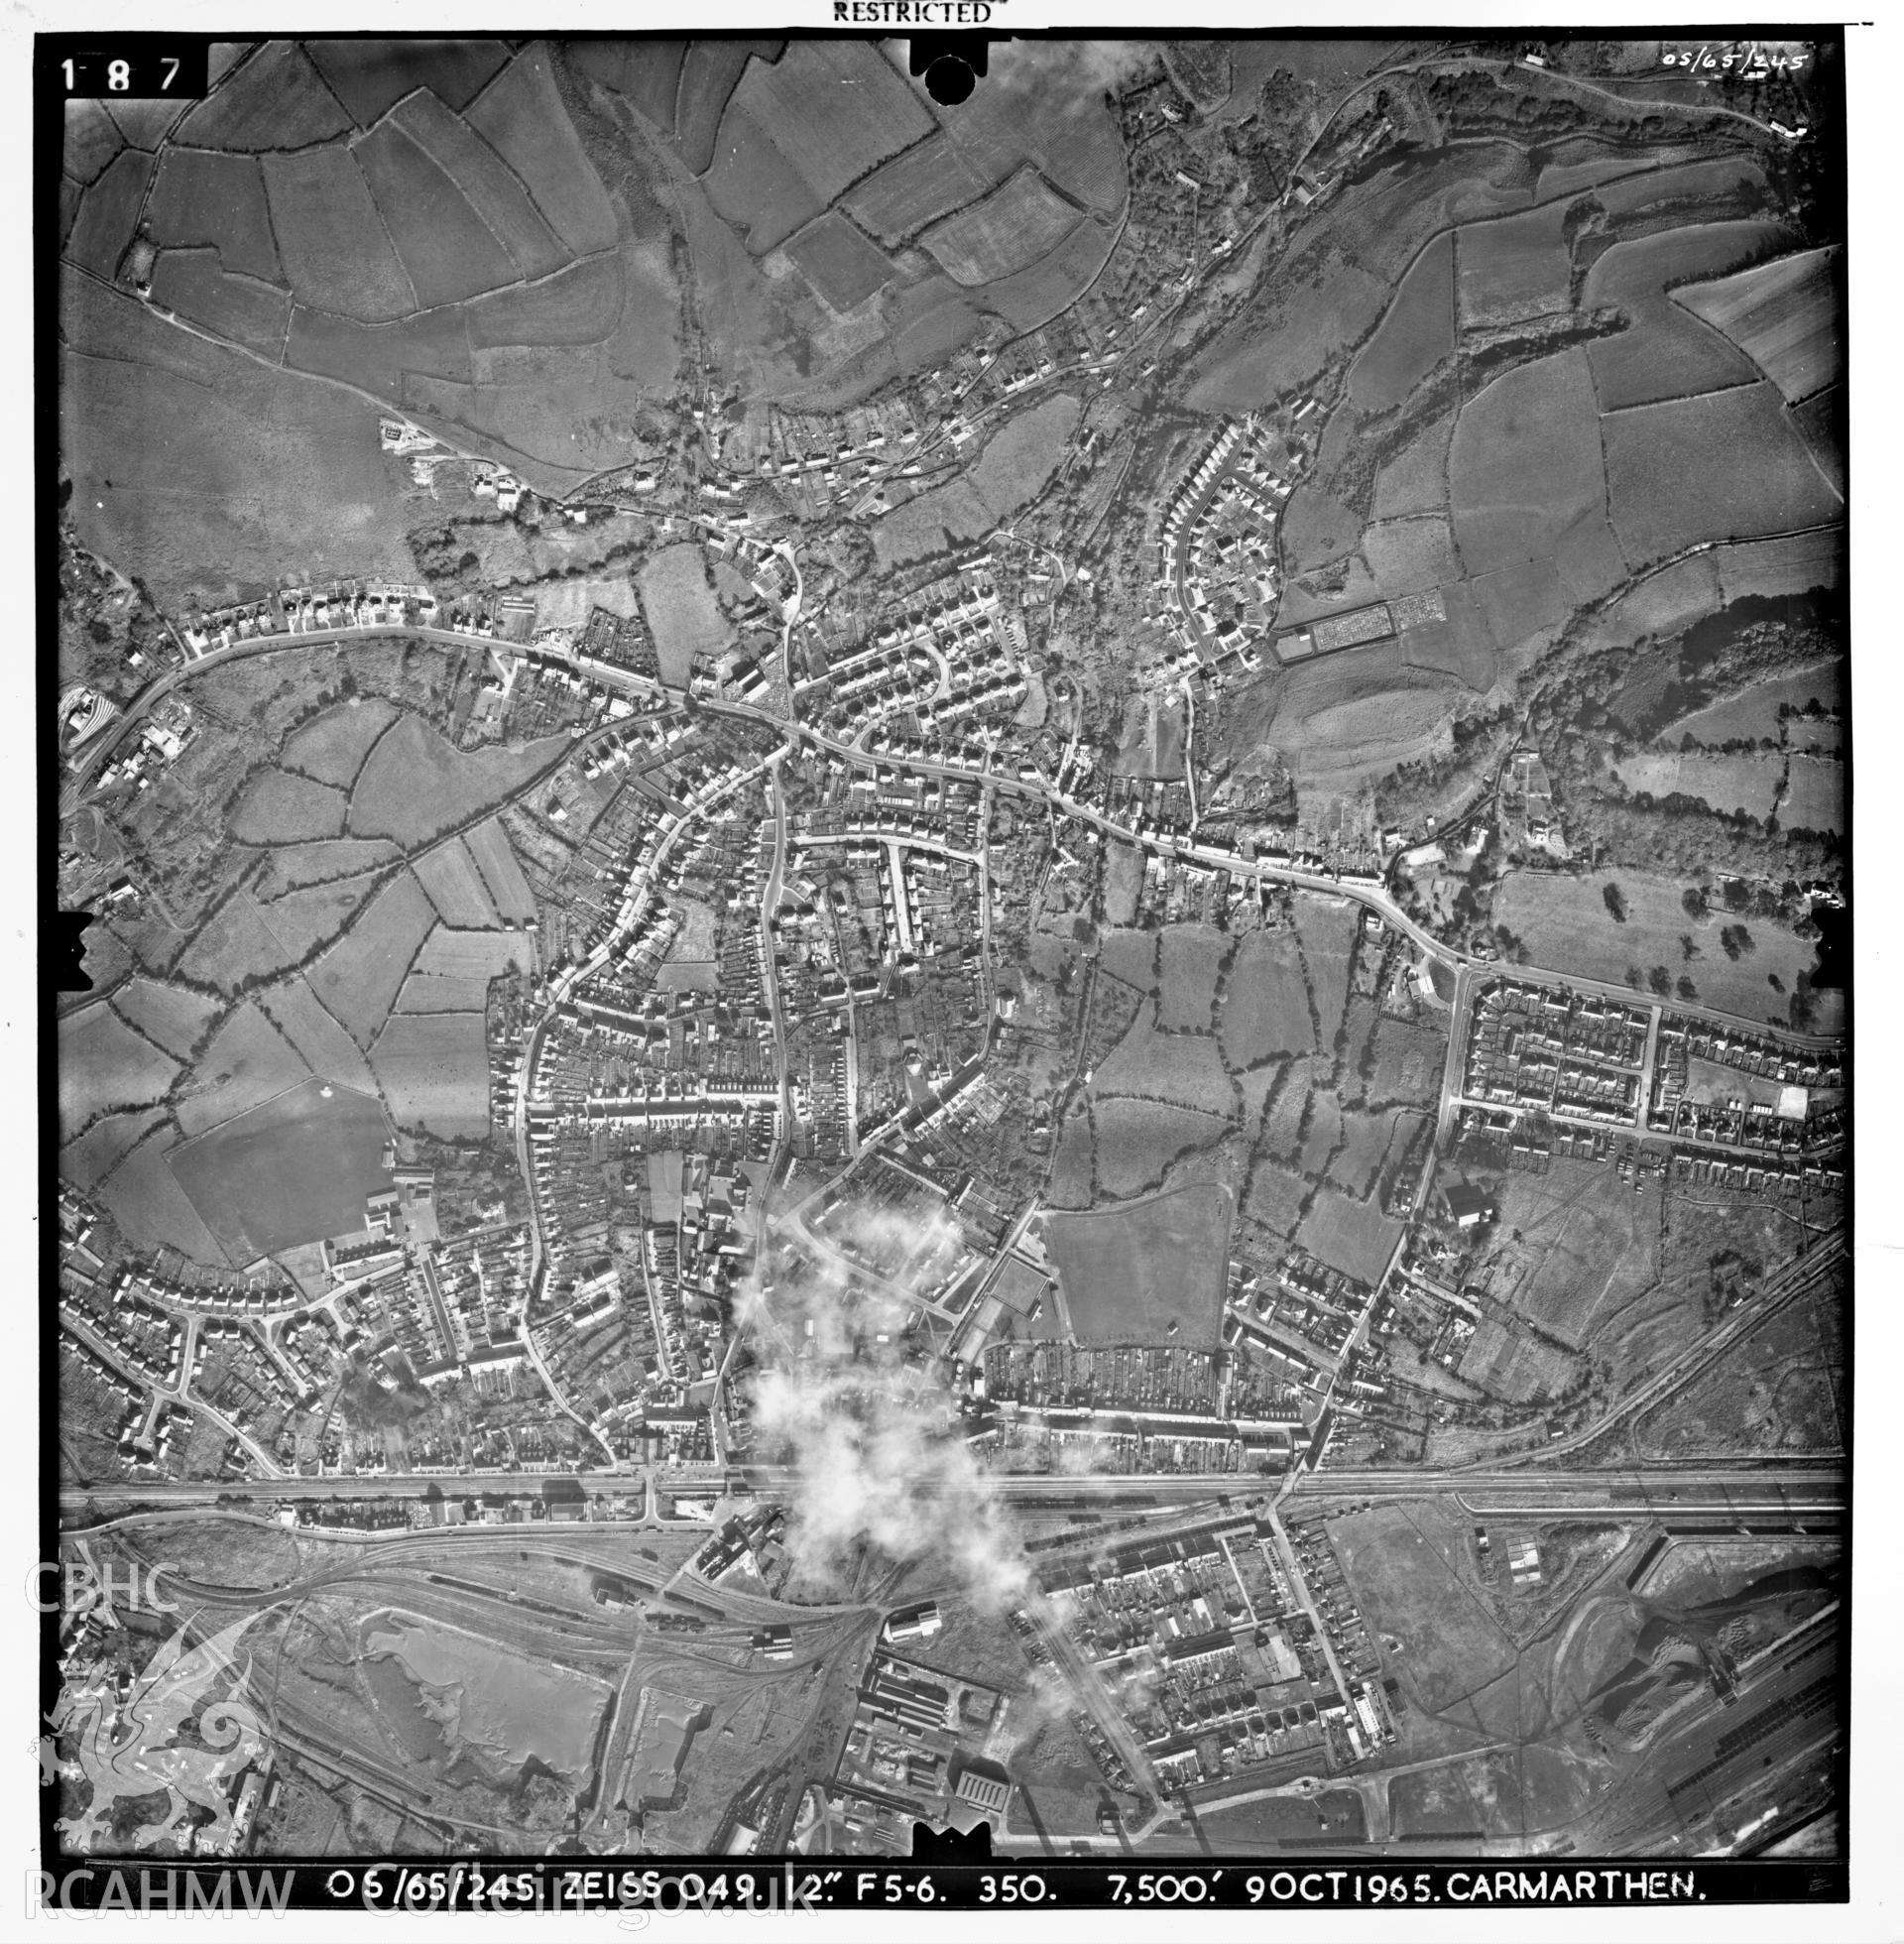 Digitized copy of an aerial photograph showing Burry Port area, taken by Ordnance Survey, 1965